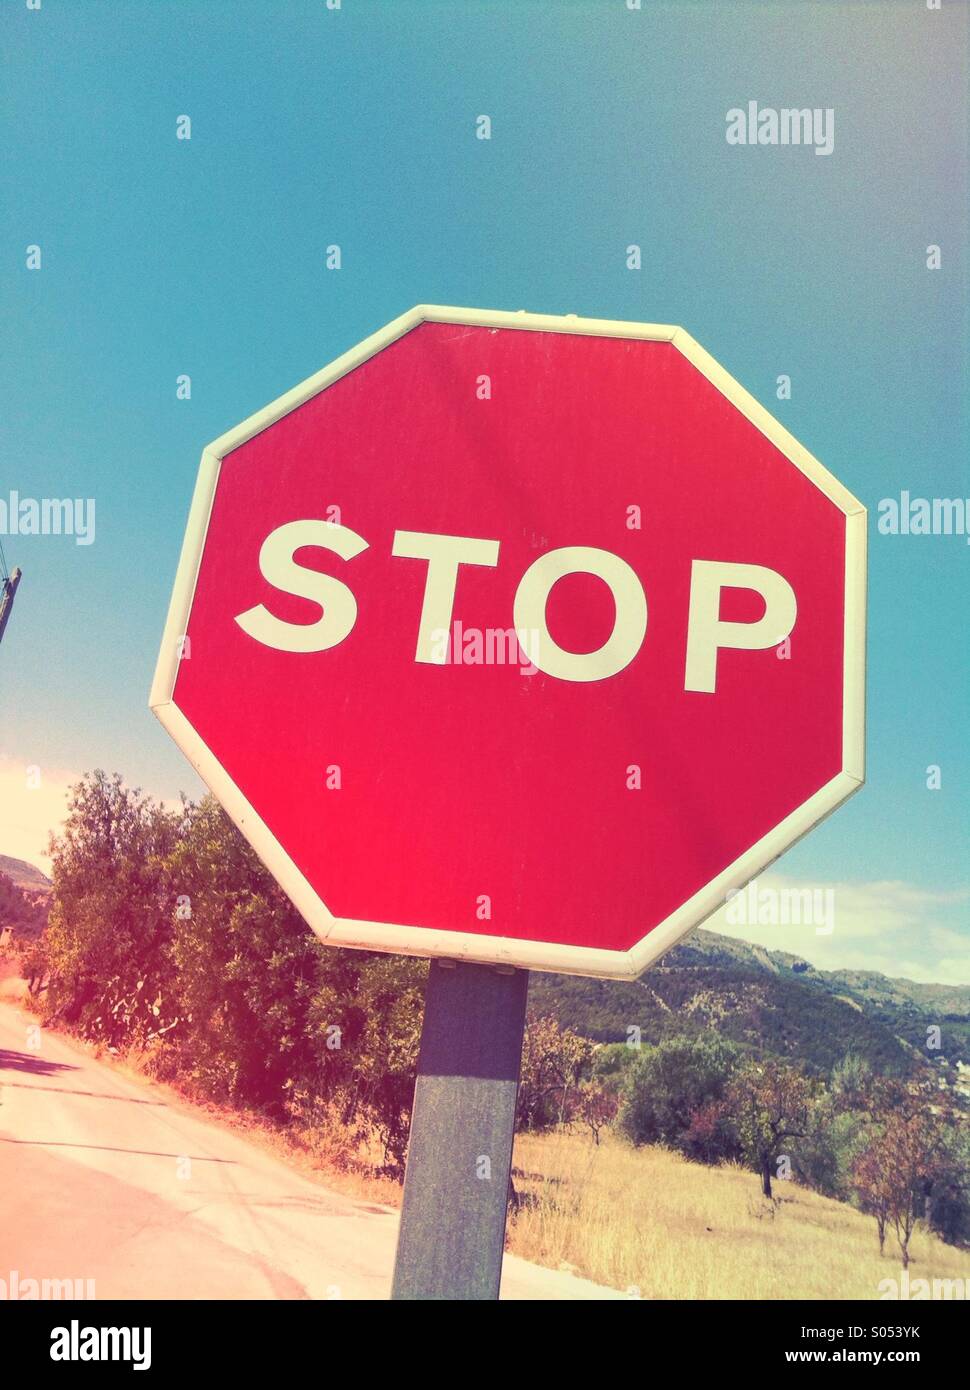 Stop sign in Spain Stock Photo